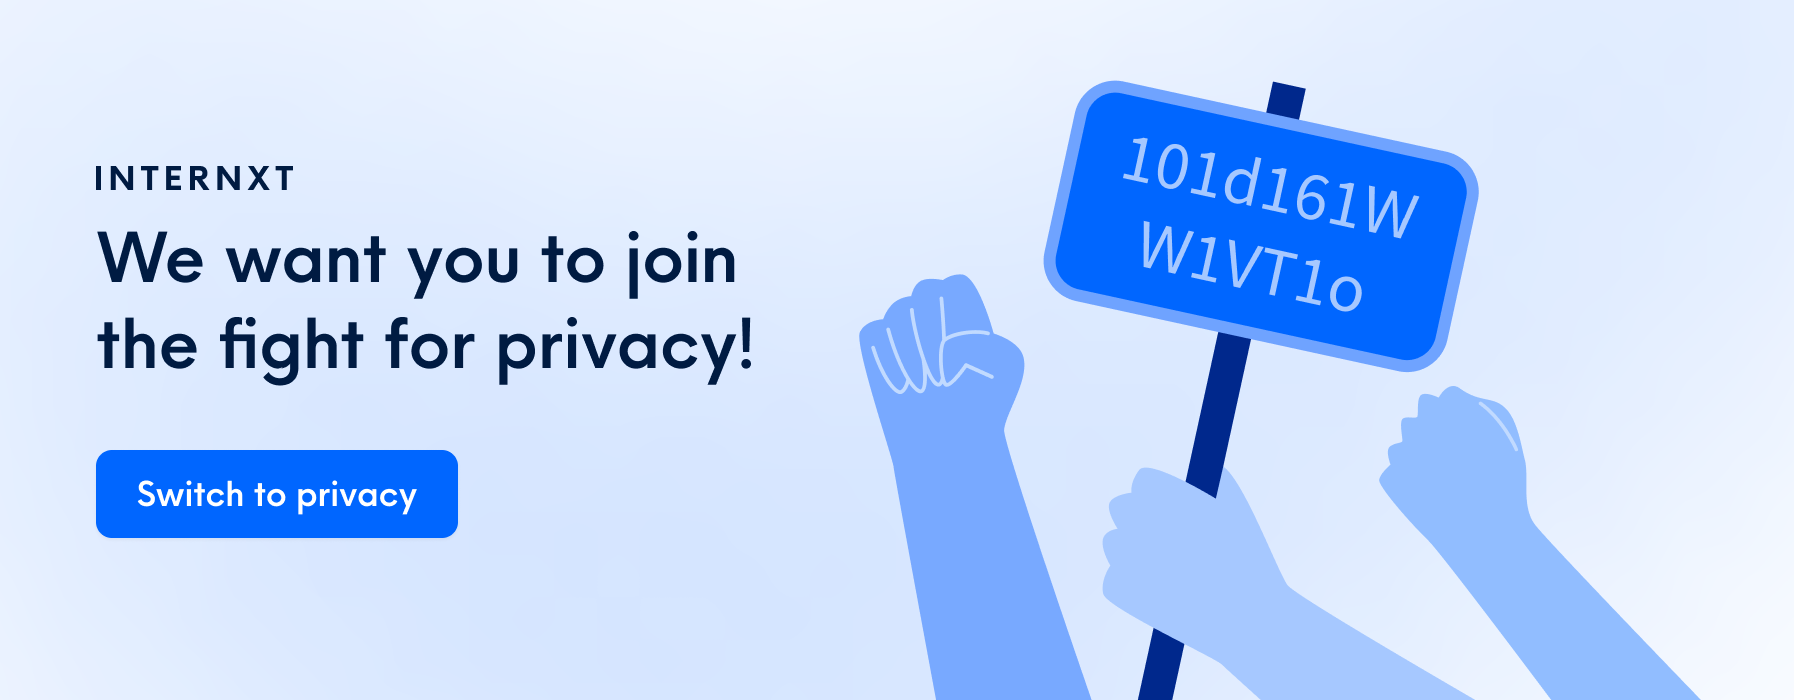 Internxt CTA: Fight for privacy.